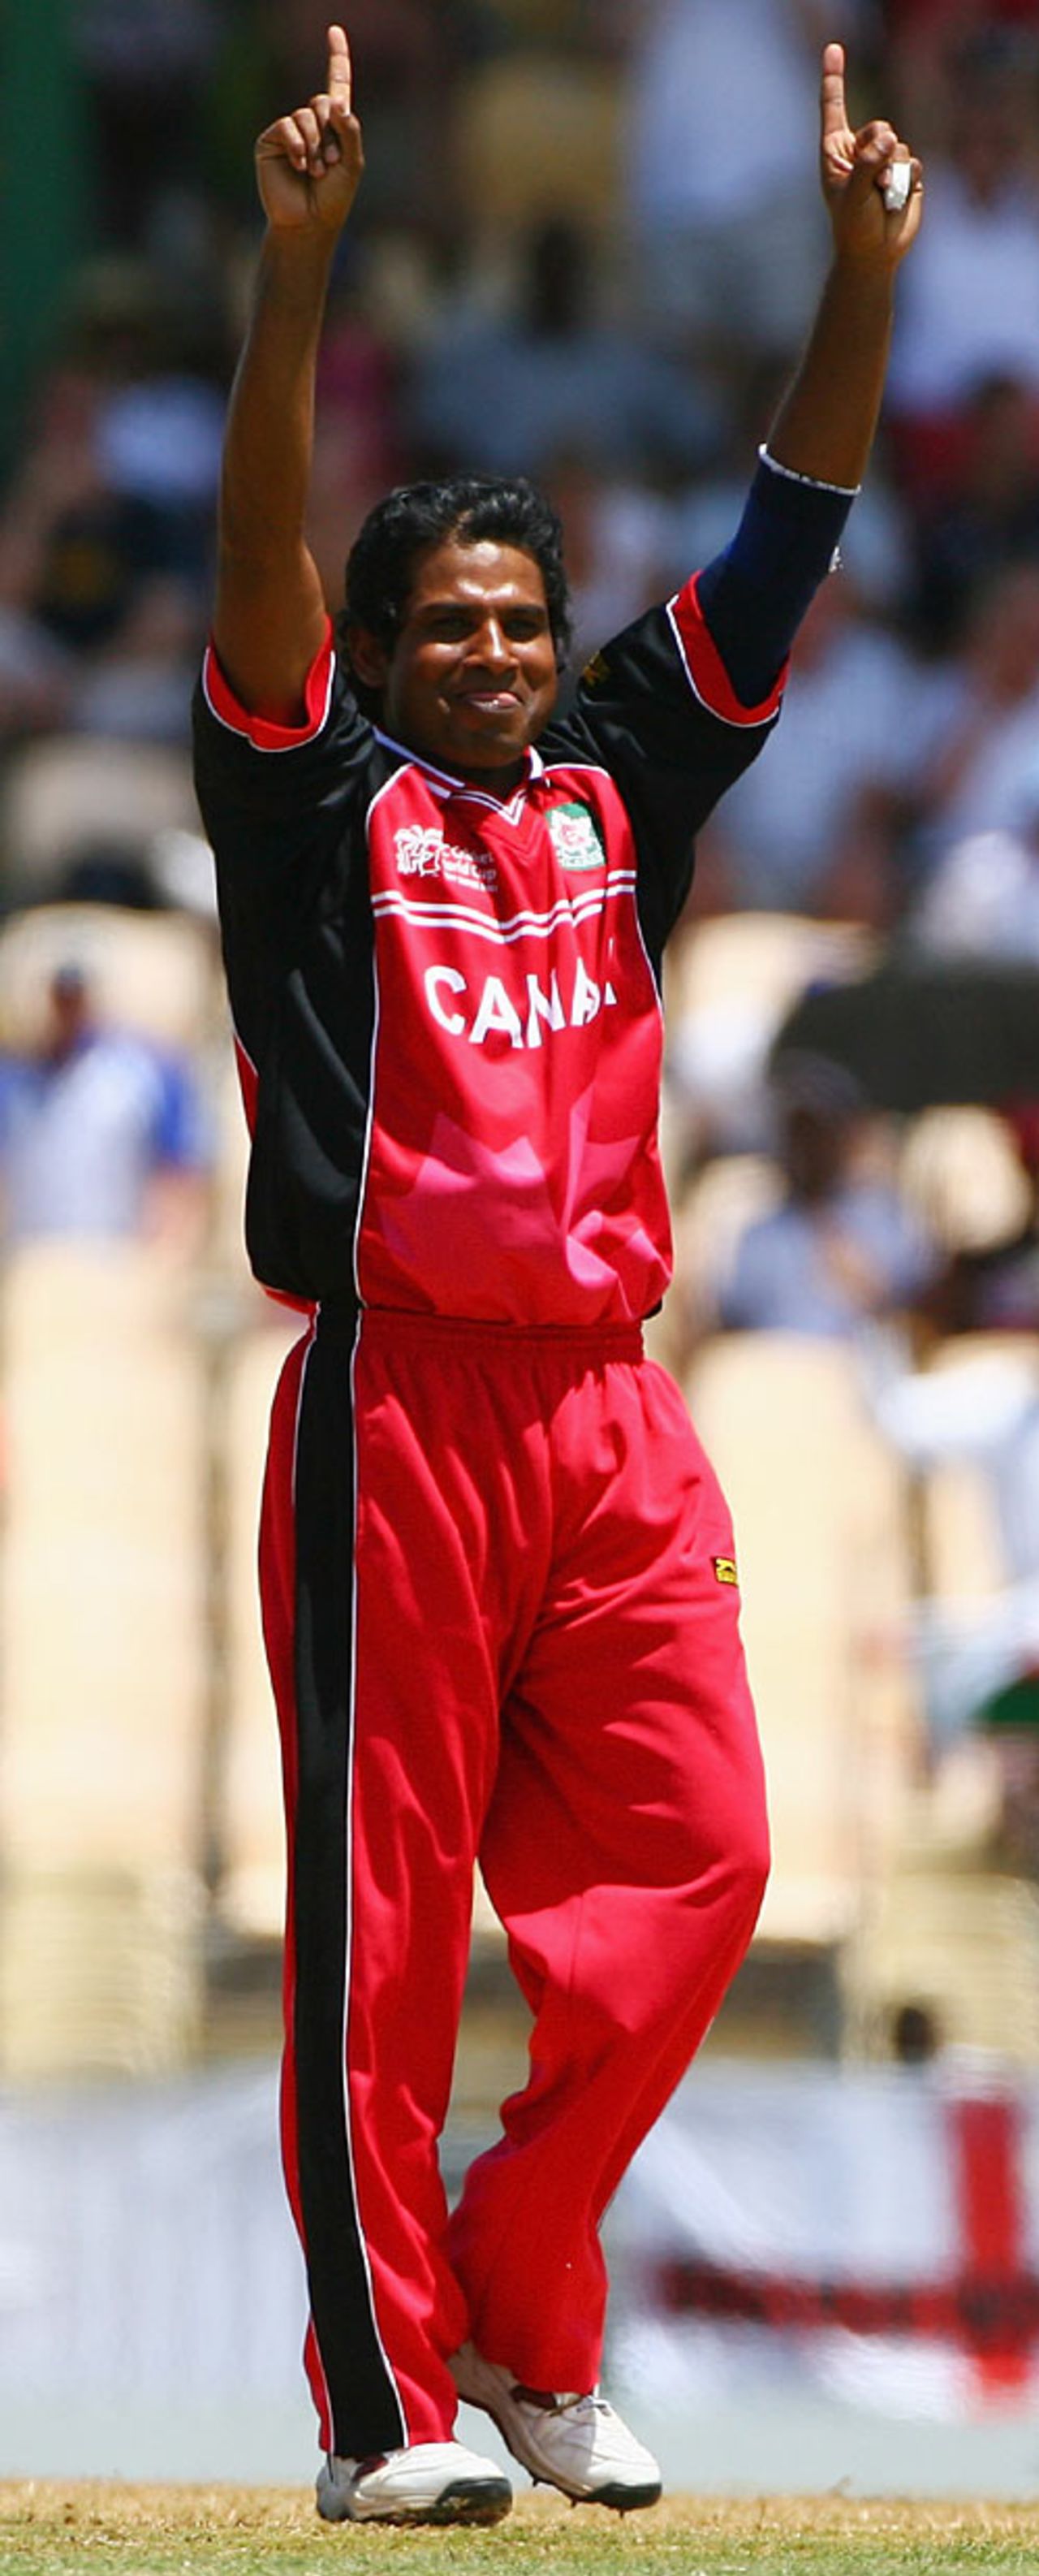 Sunil Dhaniram is over the moon after removing Ian Bell, Canada v England, Group C, St Lucia, March 18, 2007